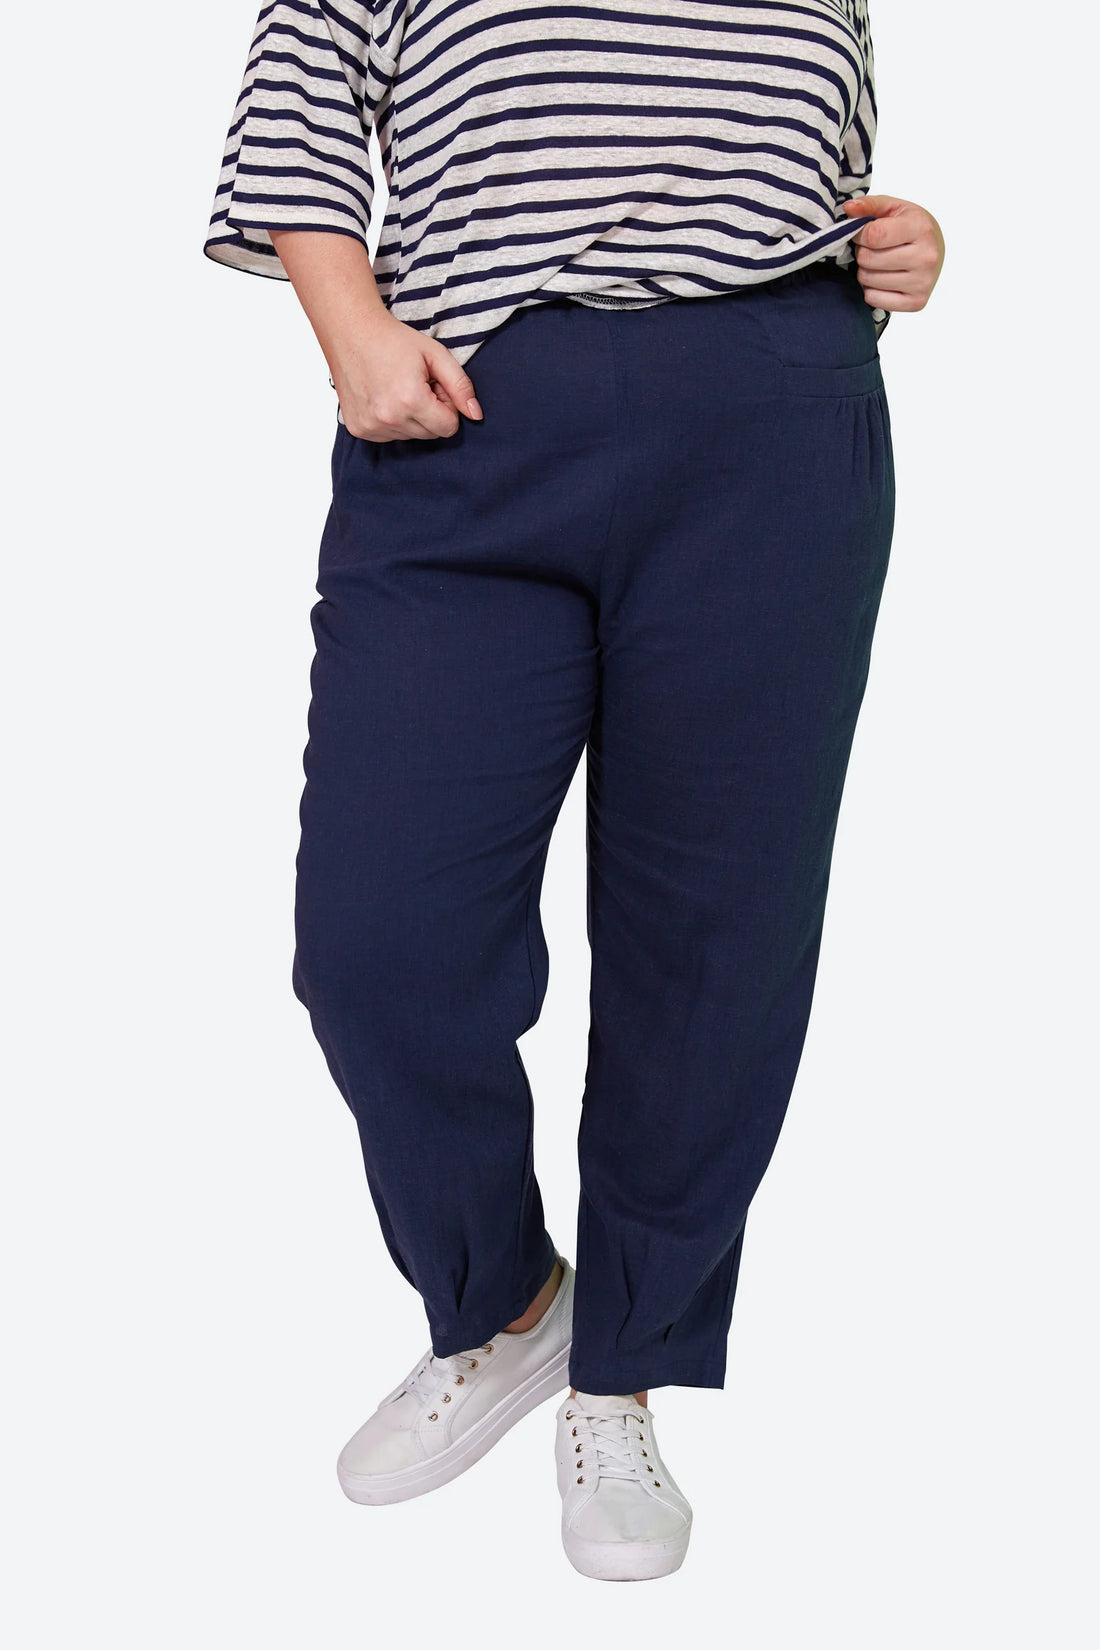 Eb&amp;Ive Verve Pant in Sapphire